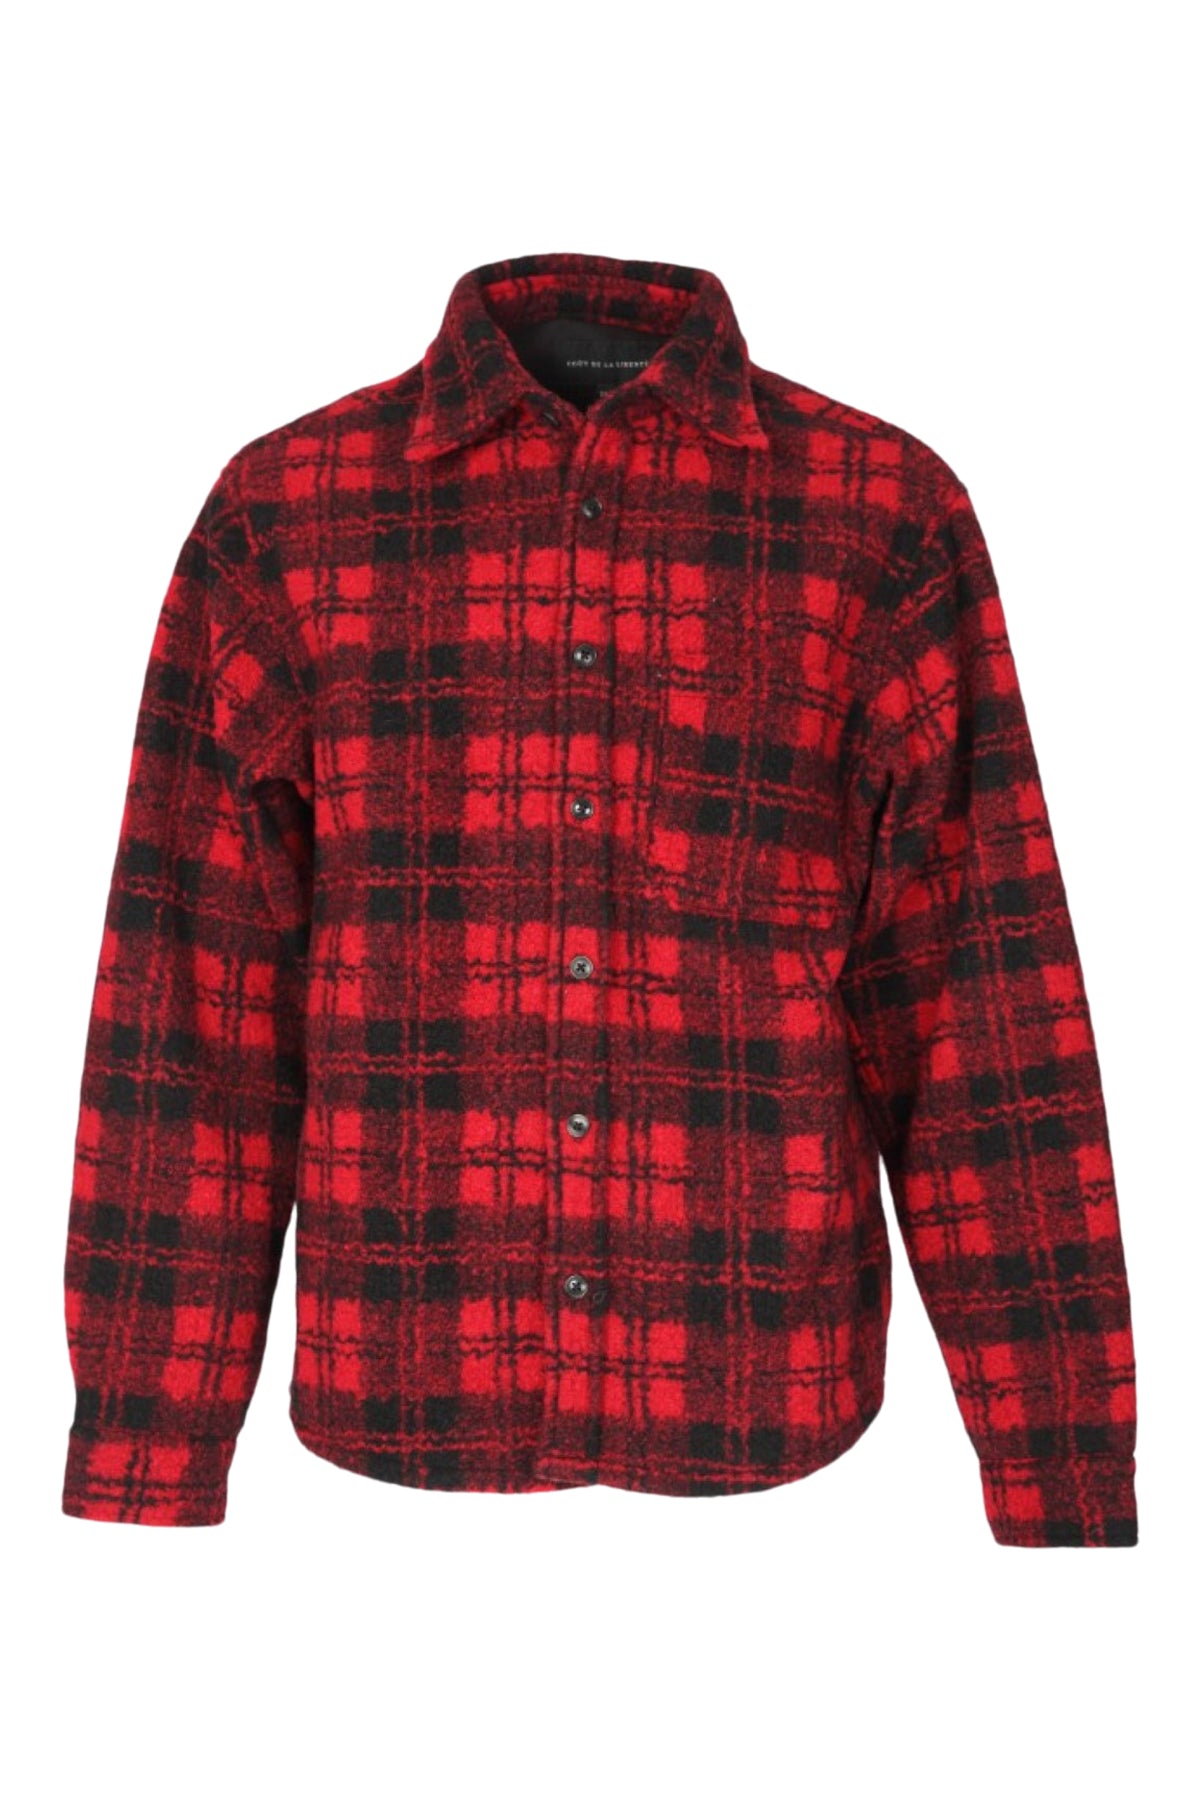 M255722_RED PLAID 603_front